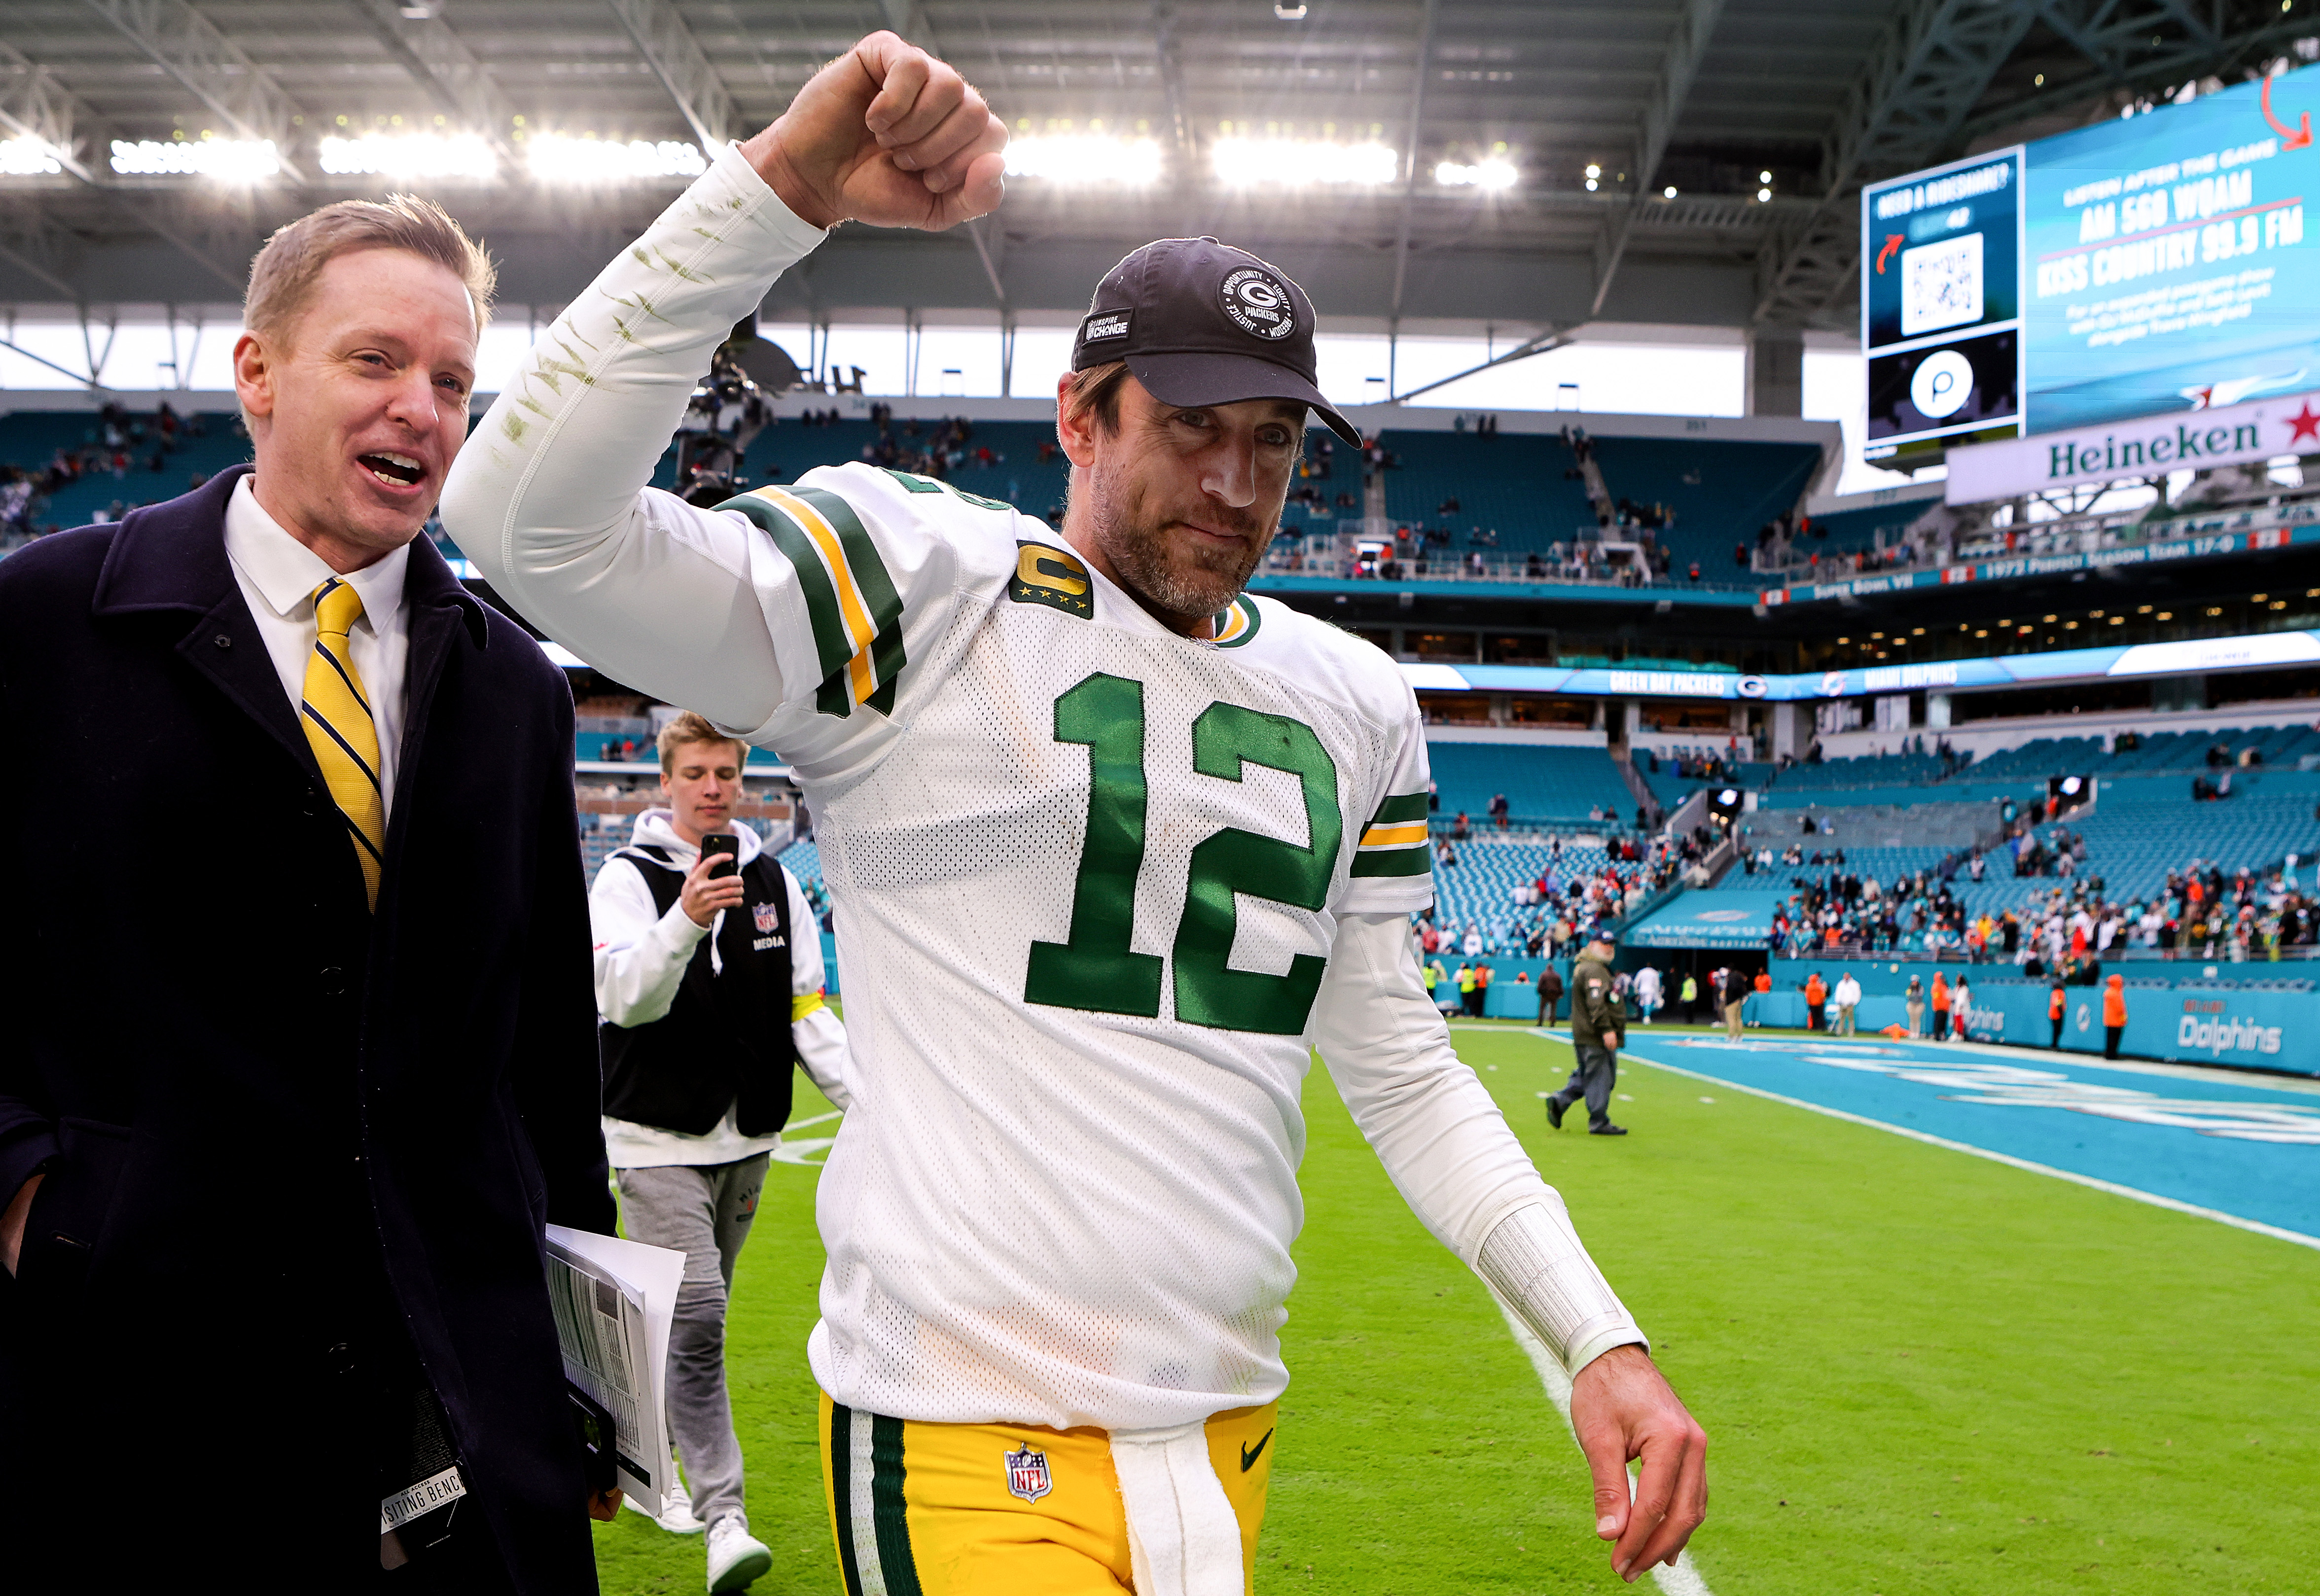 Joe Namath would allow Aaron Rodgers to wear retired number with